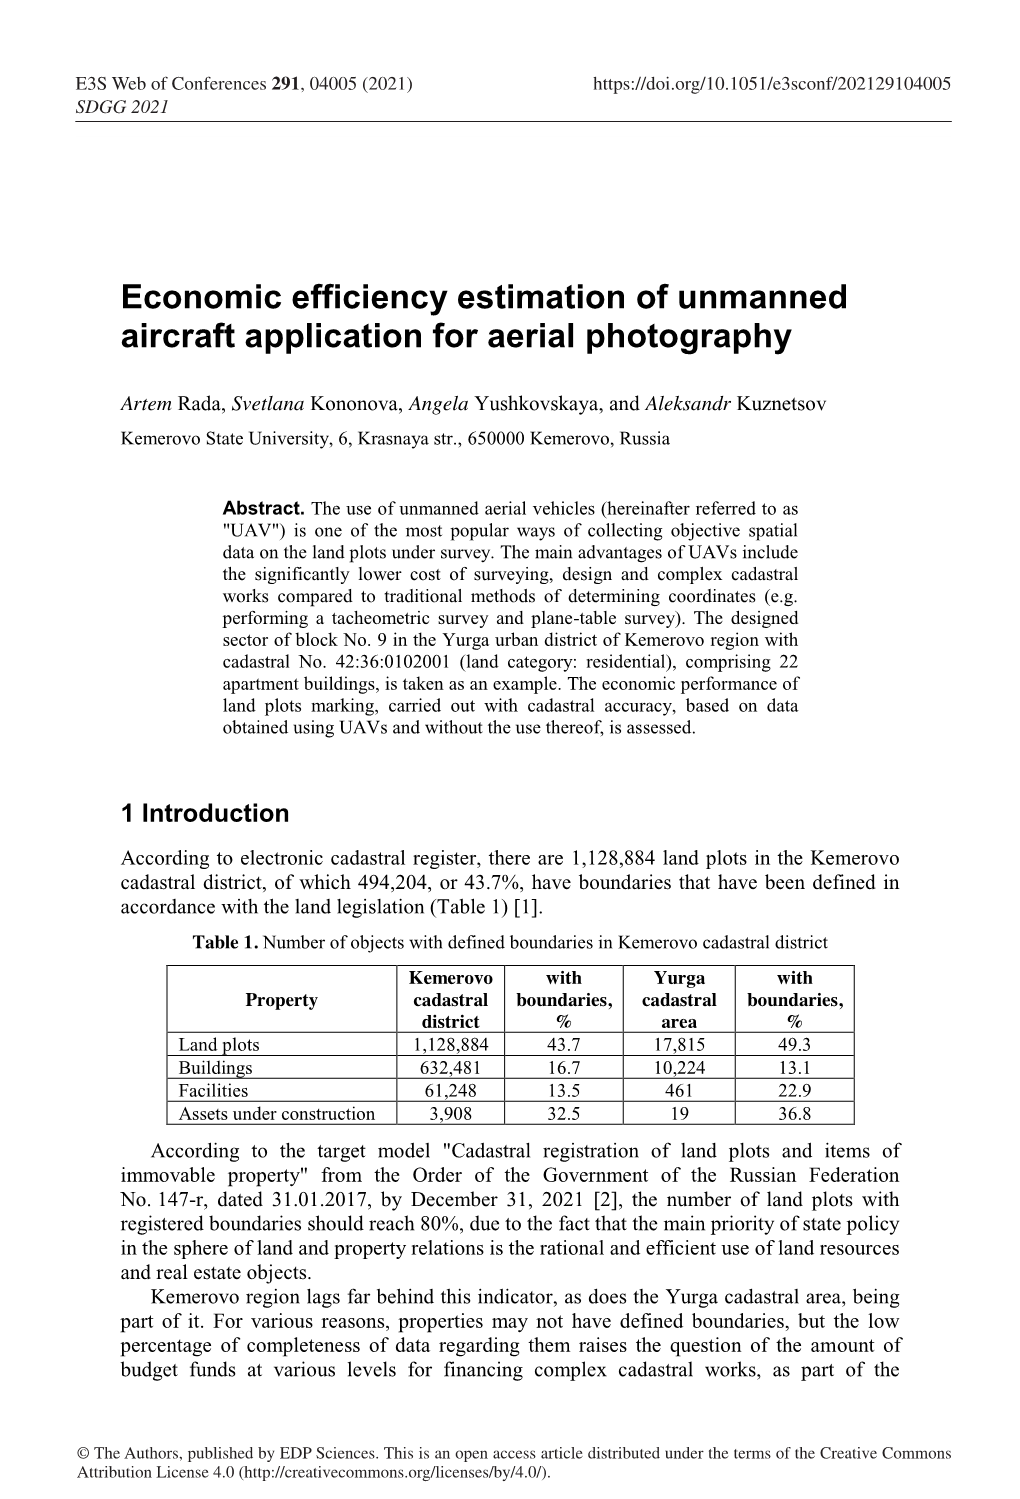 Economic Efficiency Estimation of Unmanned Aircraft Application for Aerial Photography